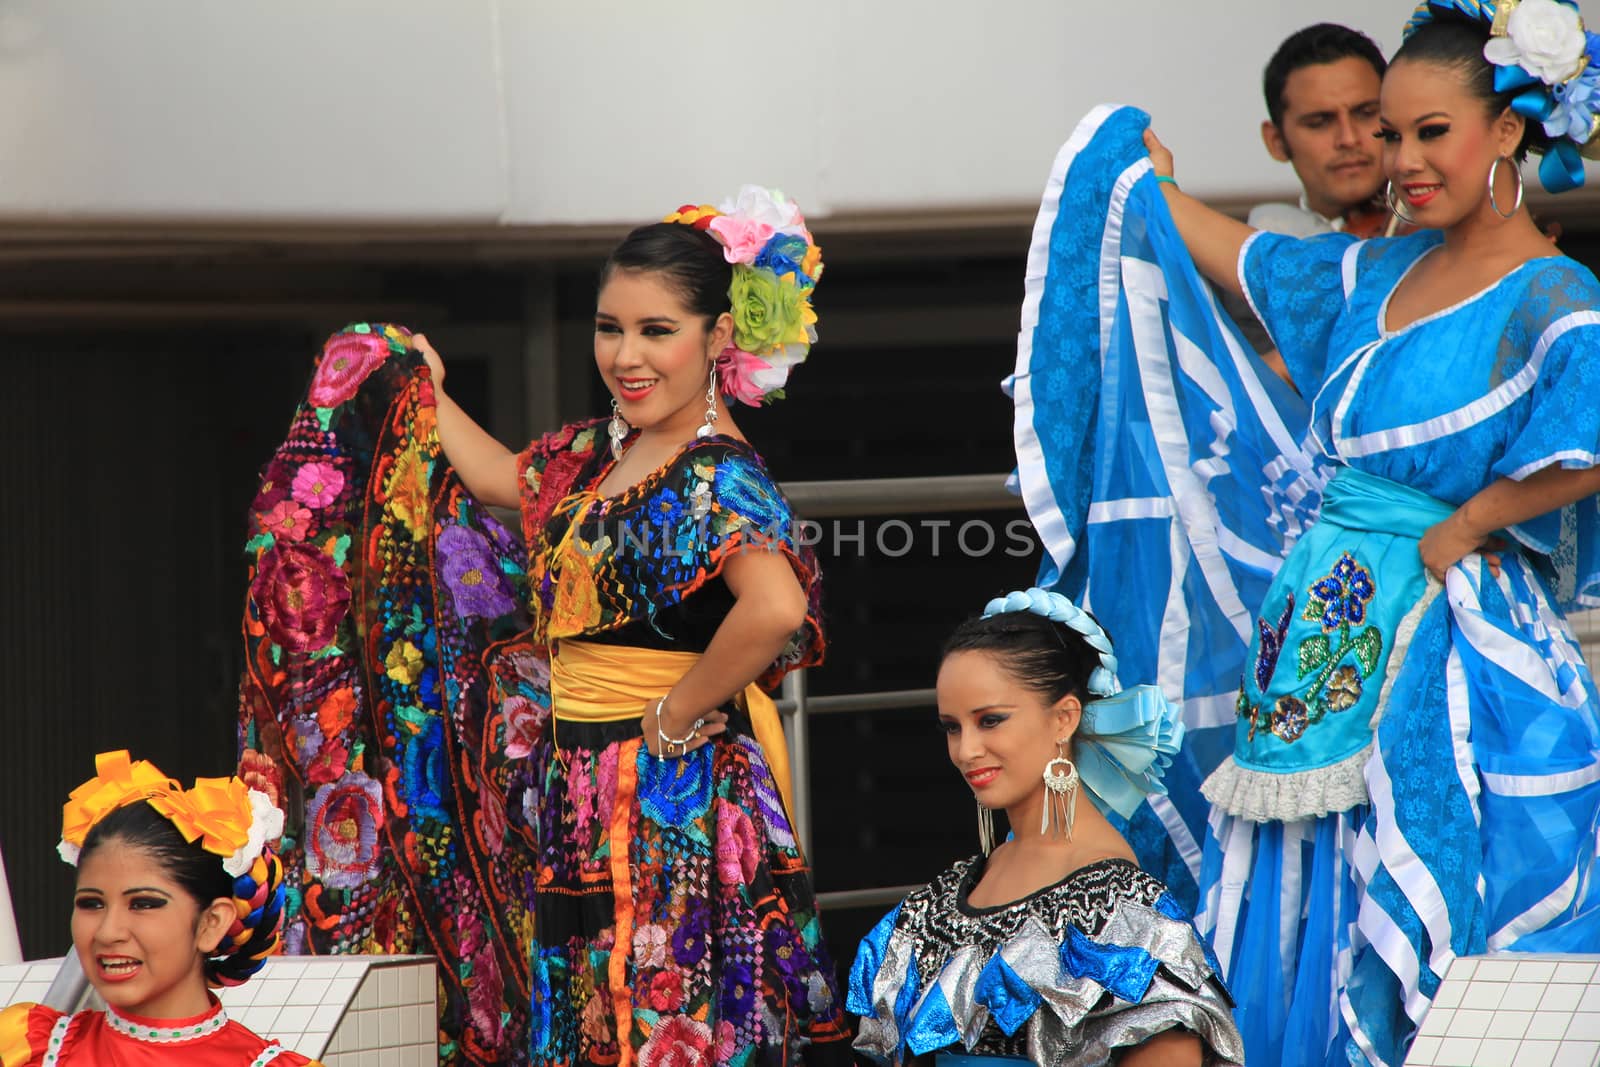 Mexican entertainers performing on stage in Puerto Vallarta, Mexico
07 Dec 2012
No model release
Editorial only